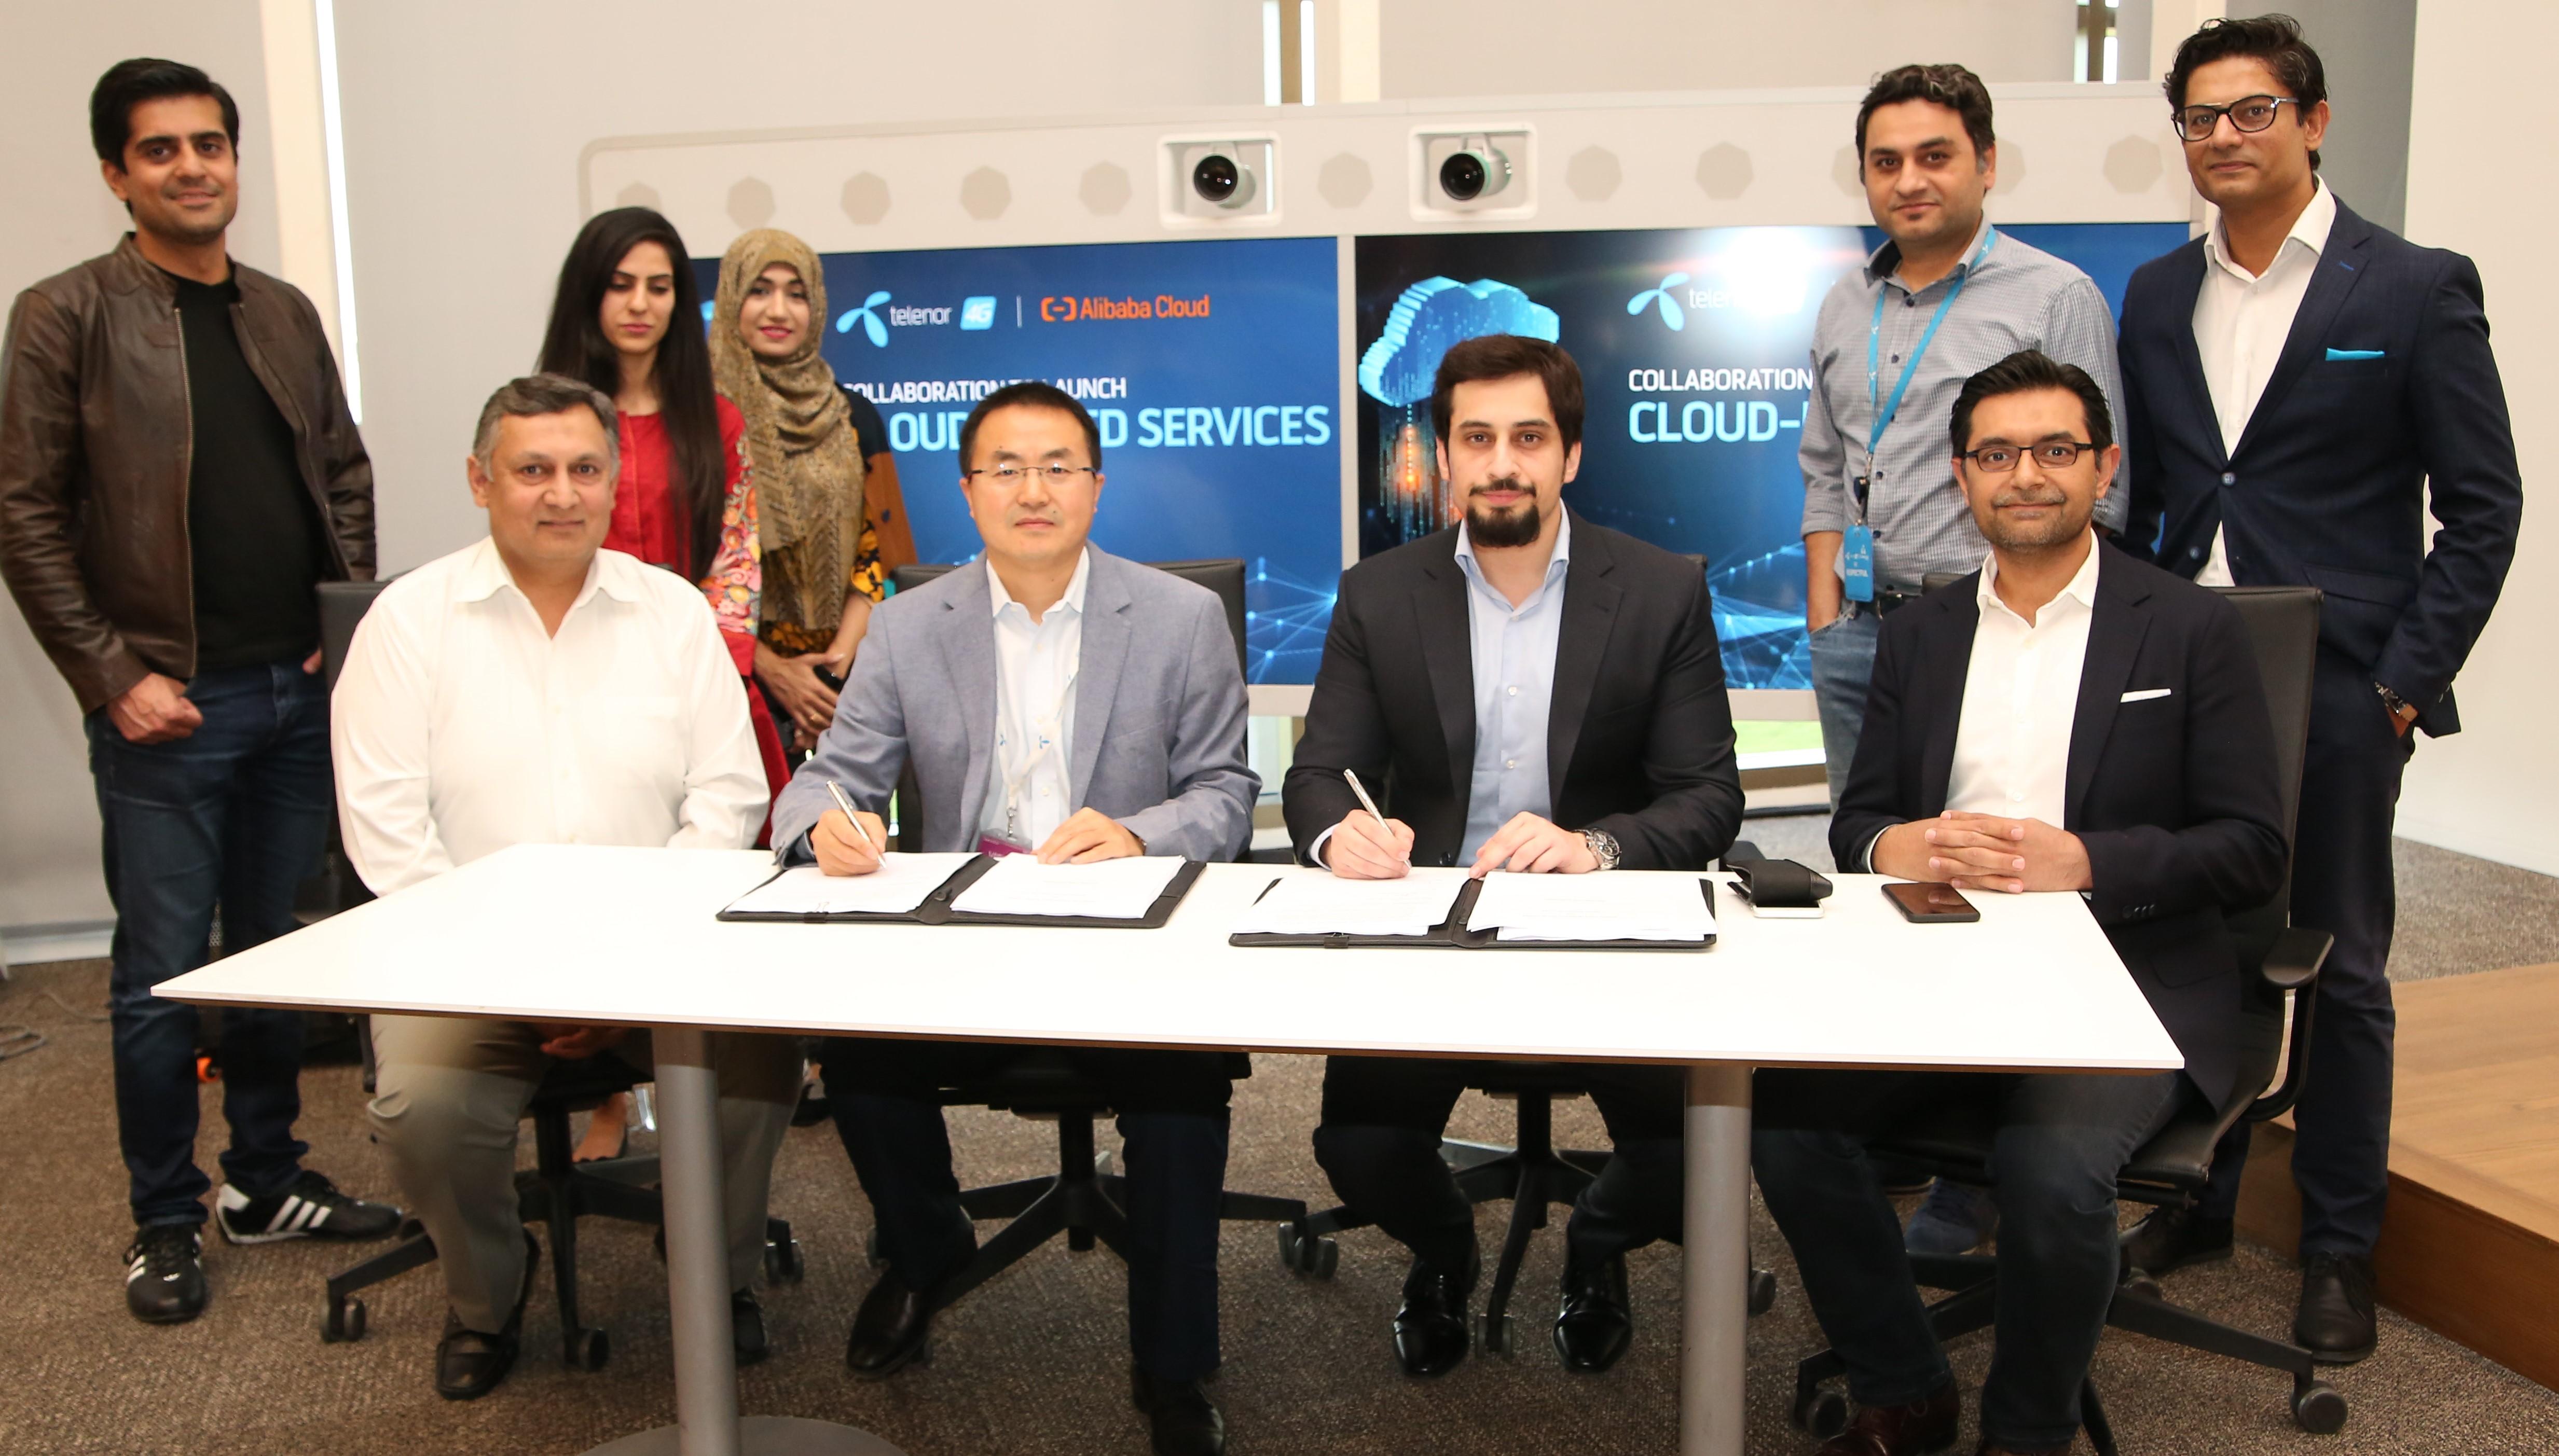 Telenor Pakistan and Alibaba Cloud come together  to provide cloud-based services and fasten digital transformation